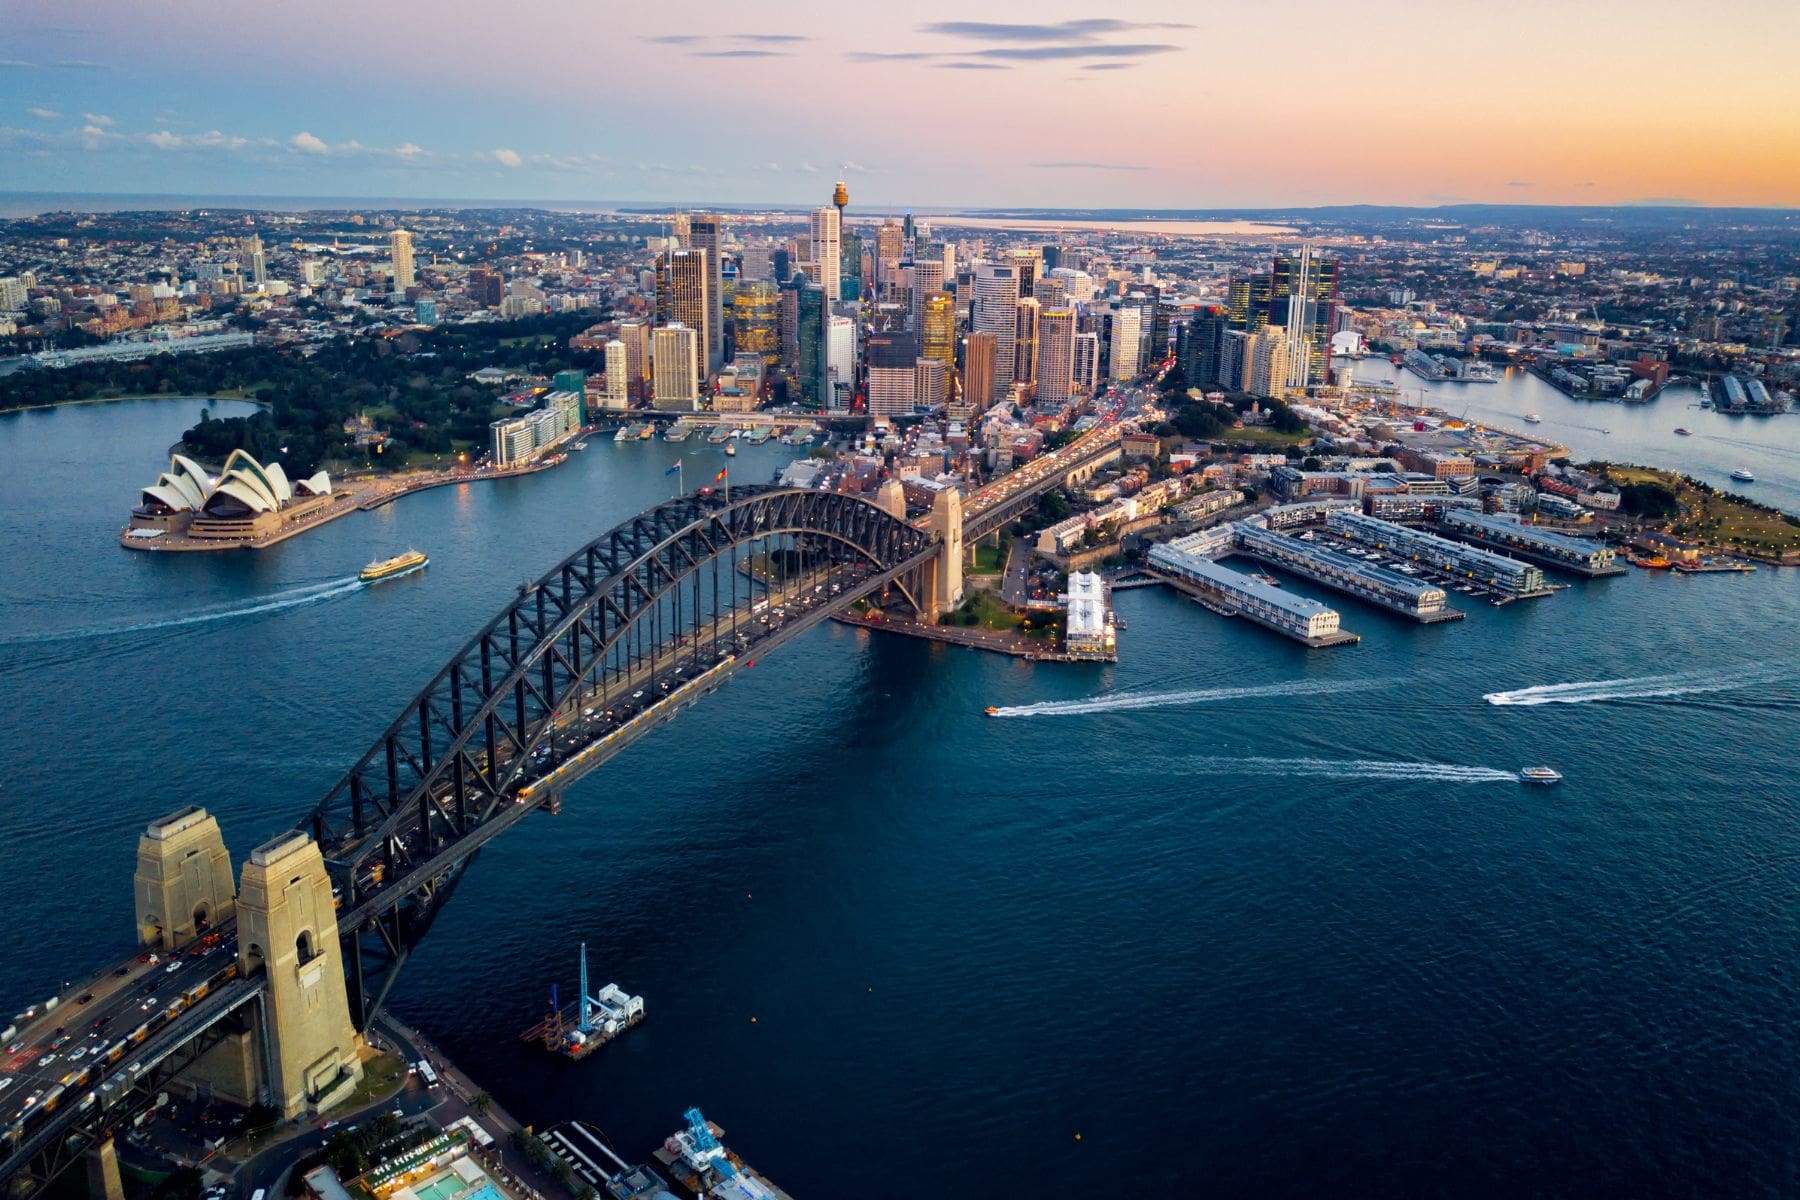 Sydney Harbour. Photo by Canva